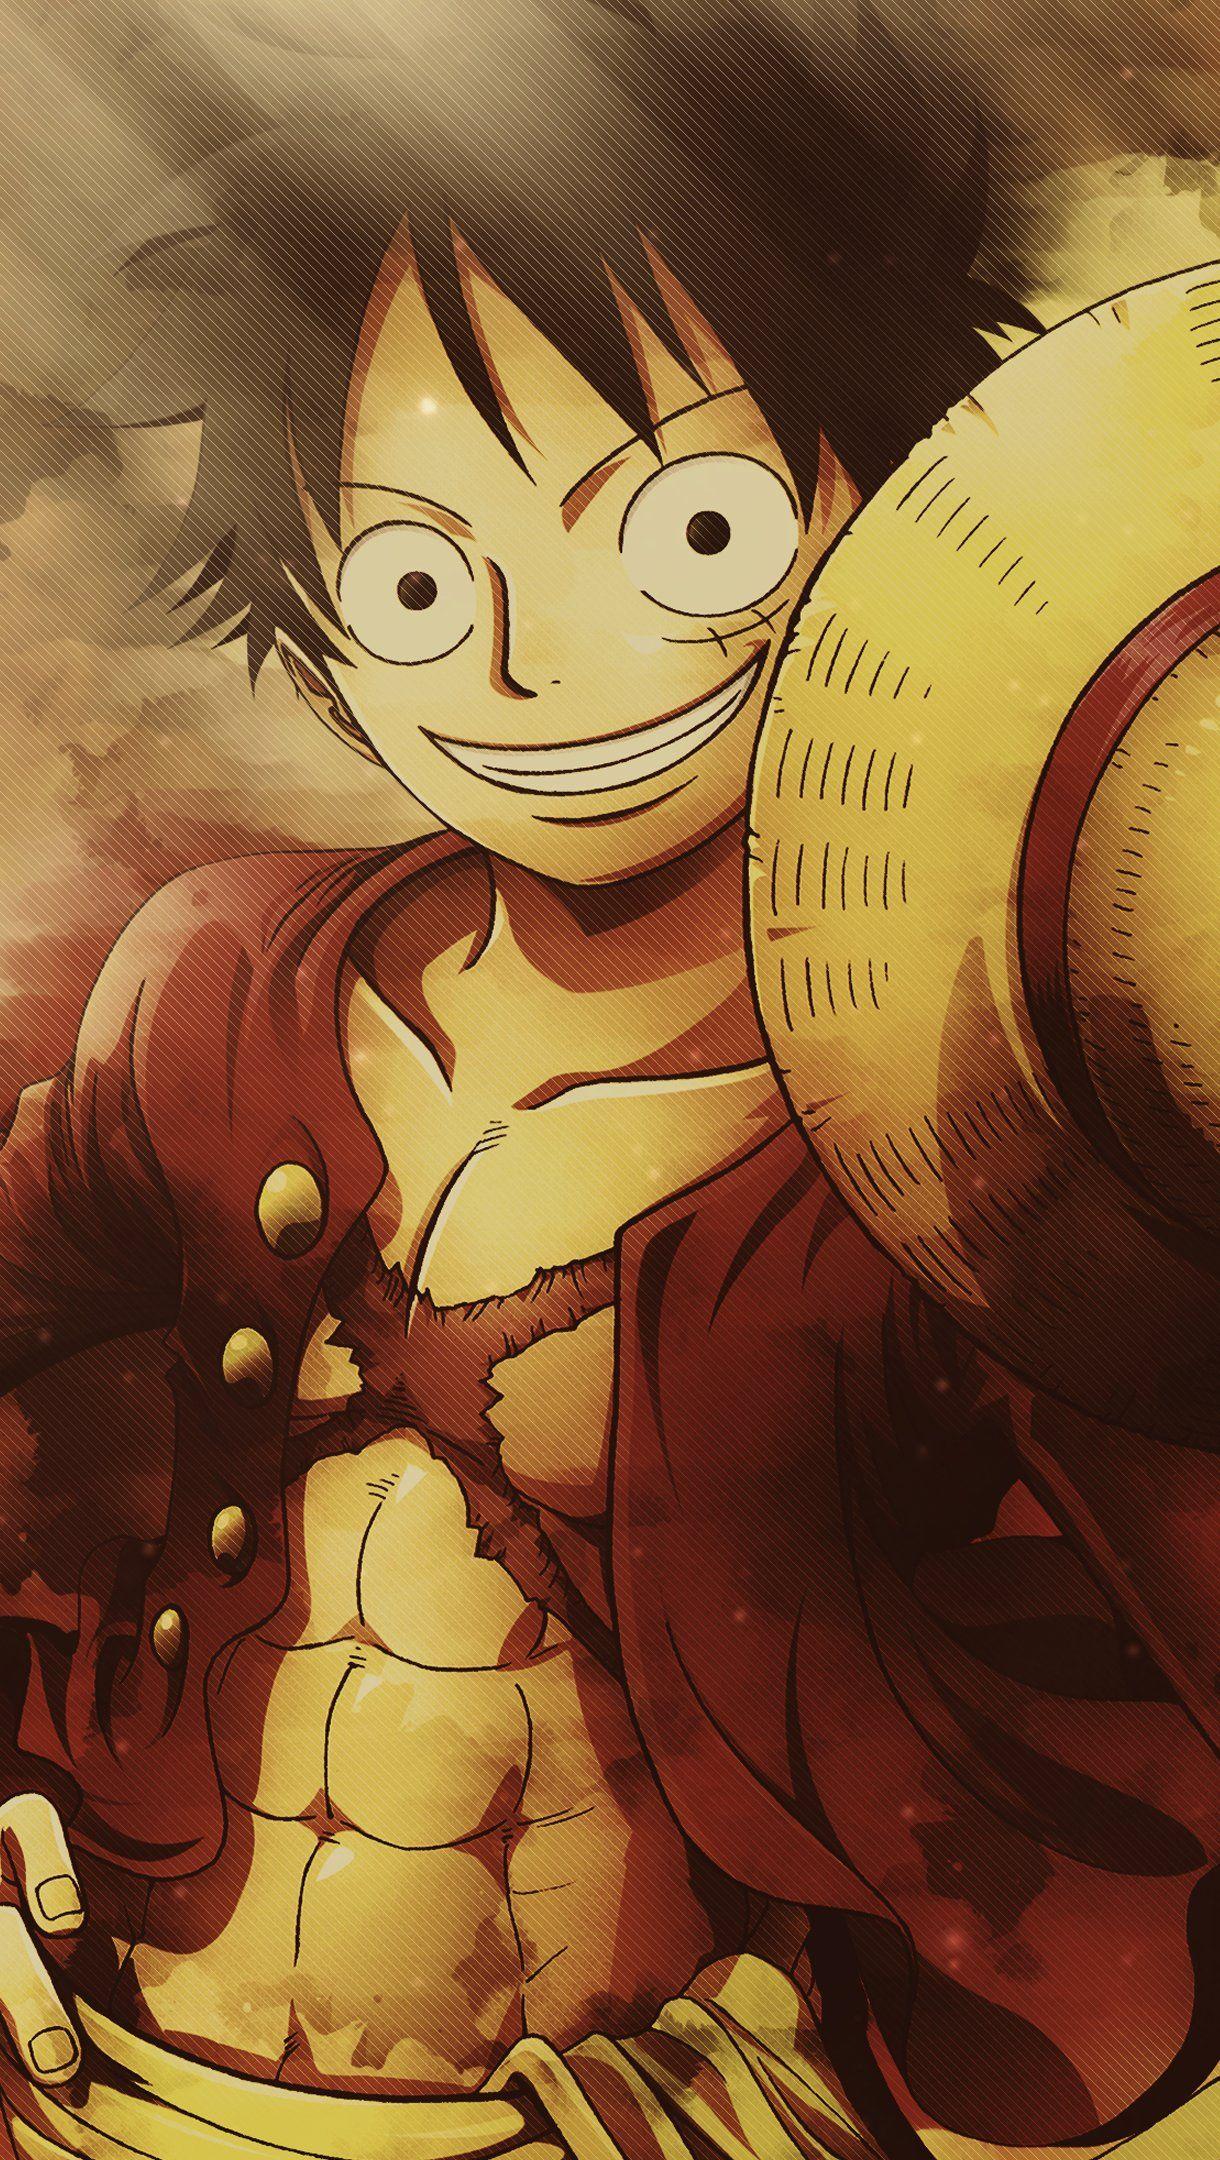 Monkey D Luffy Smile for victory 4K wallpaper download